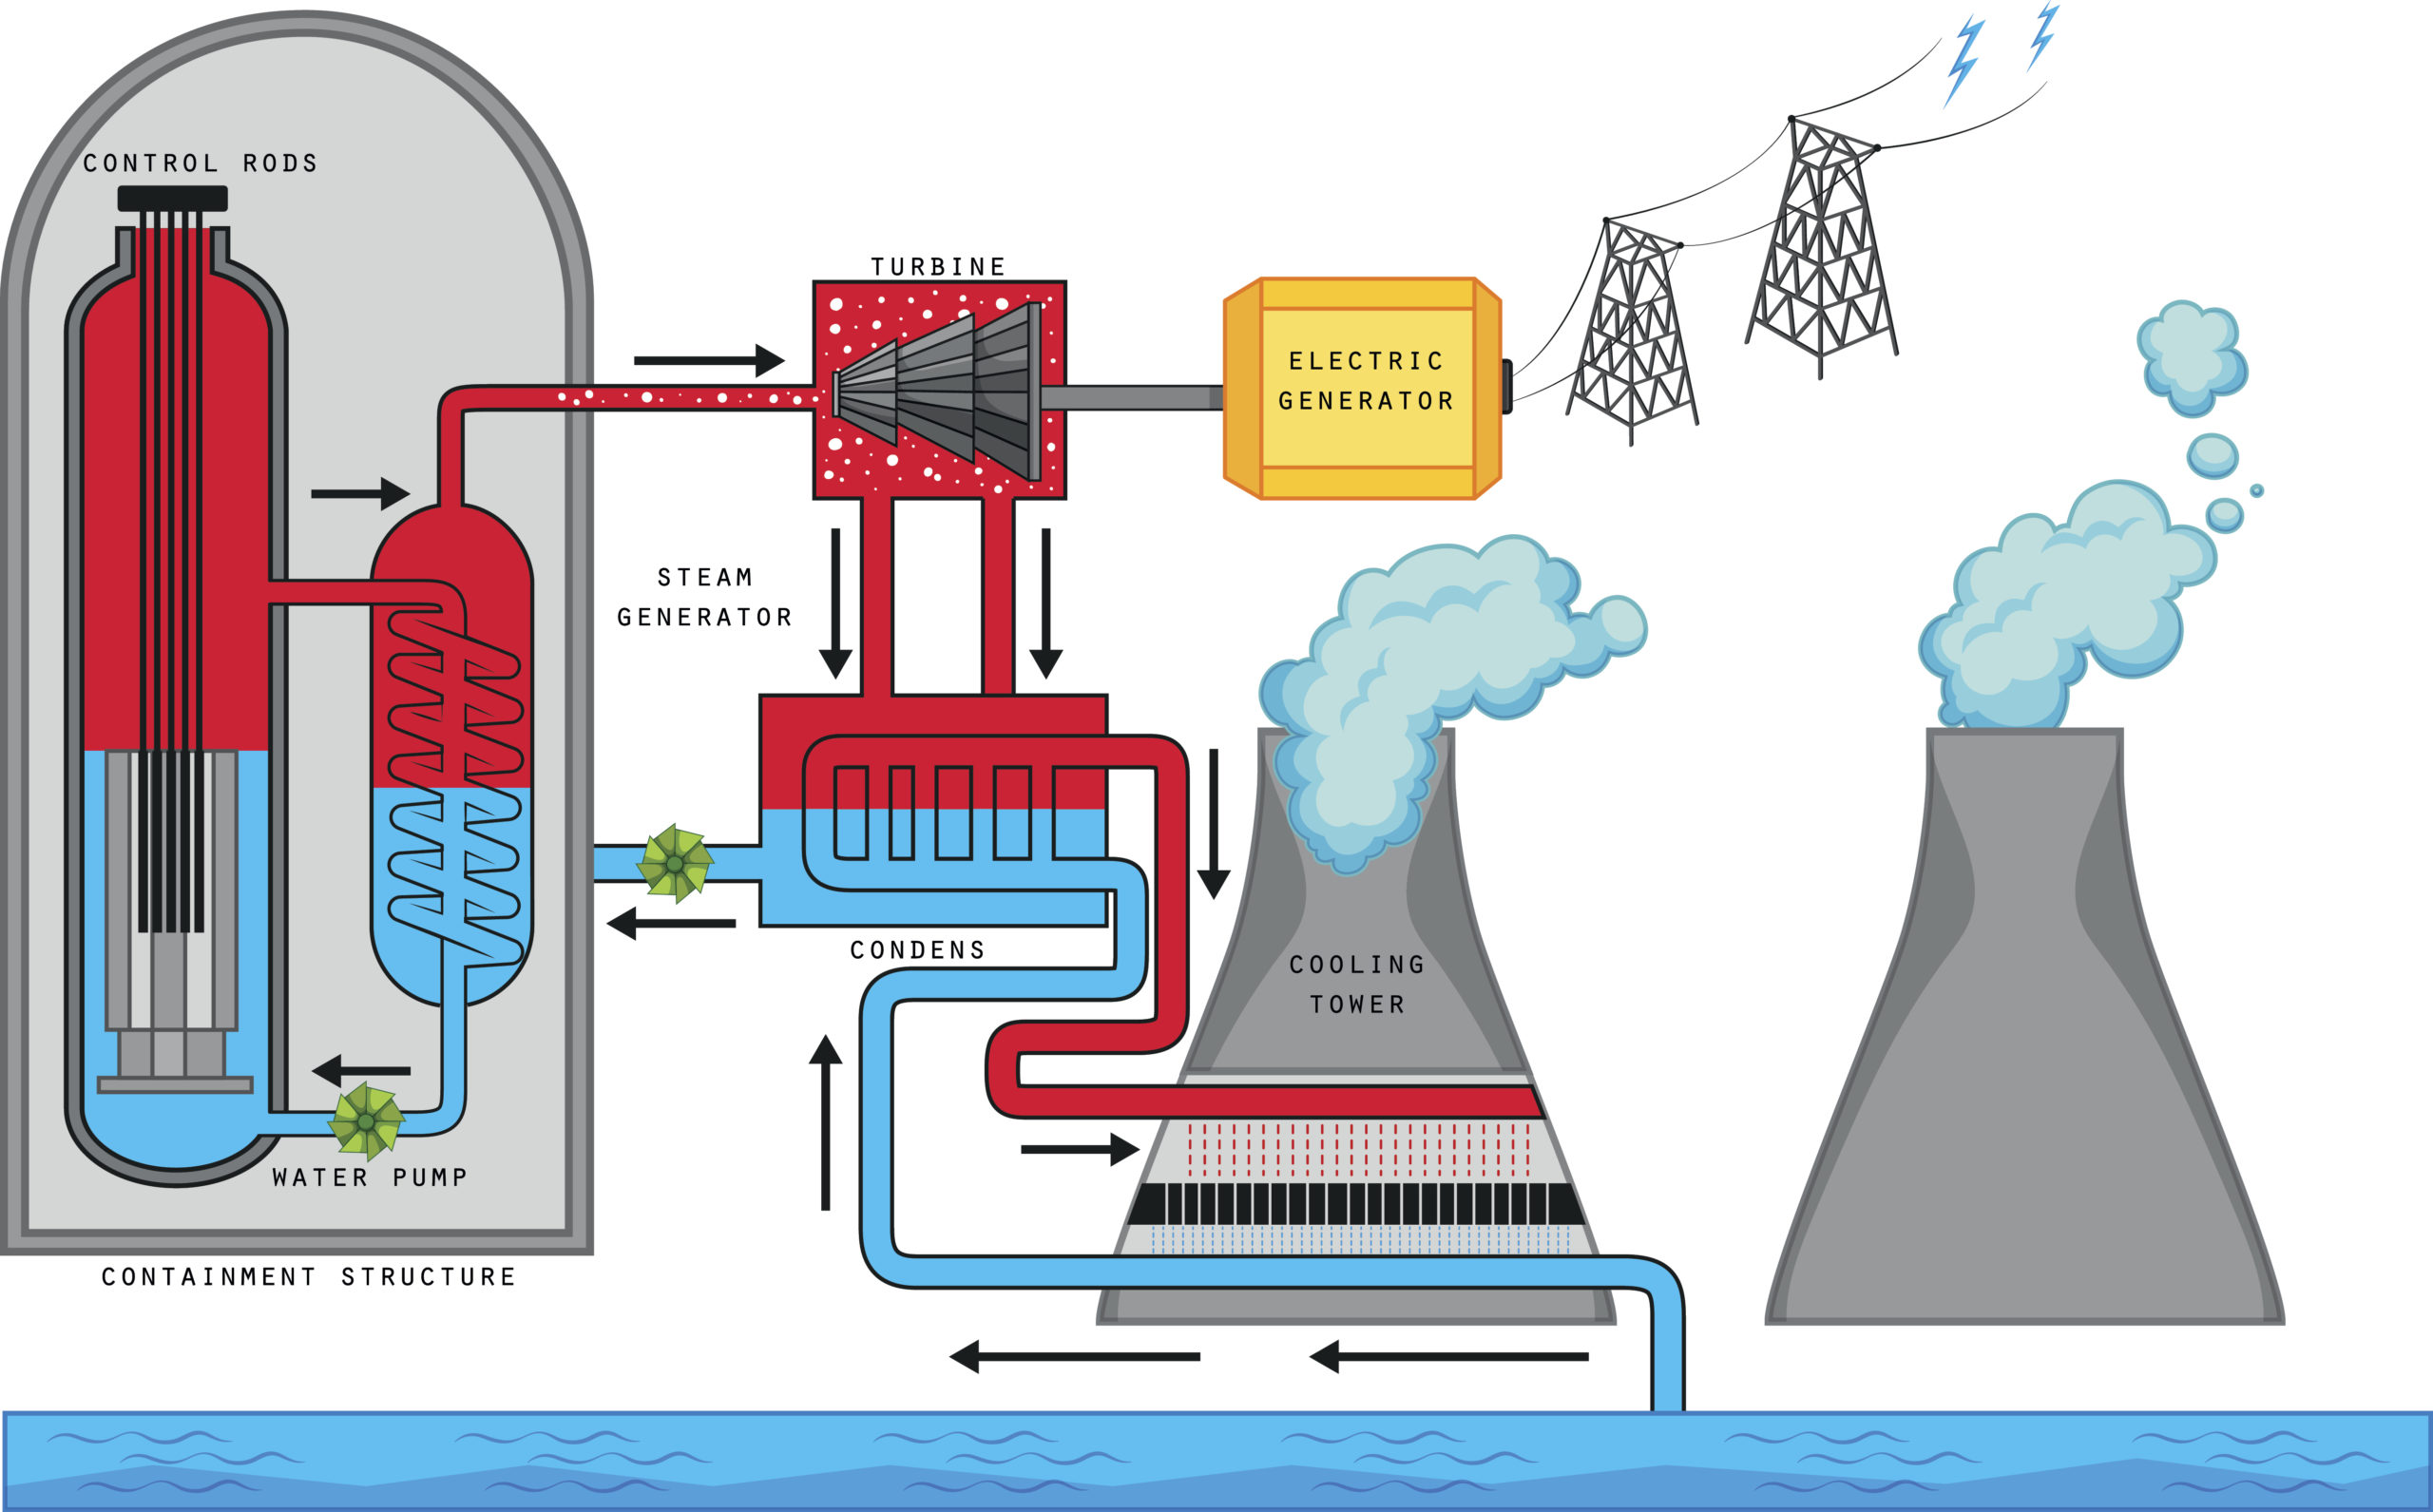 Online water quality monitoring in power plants